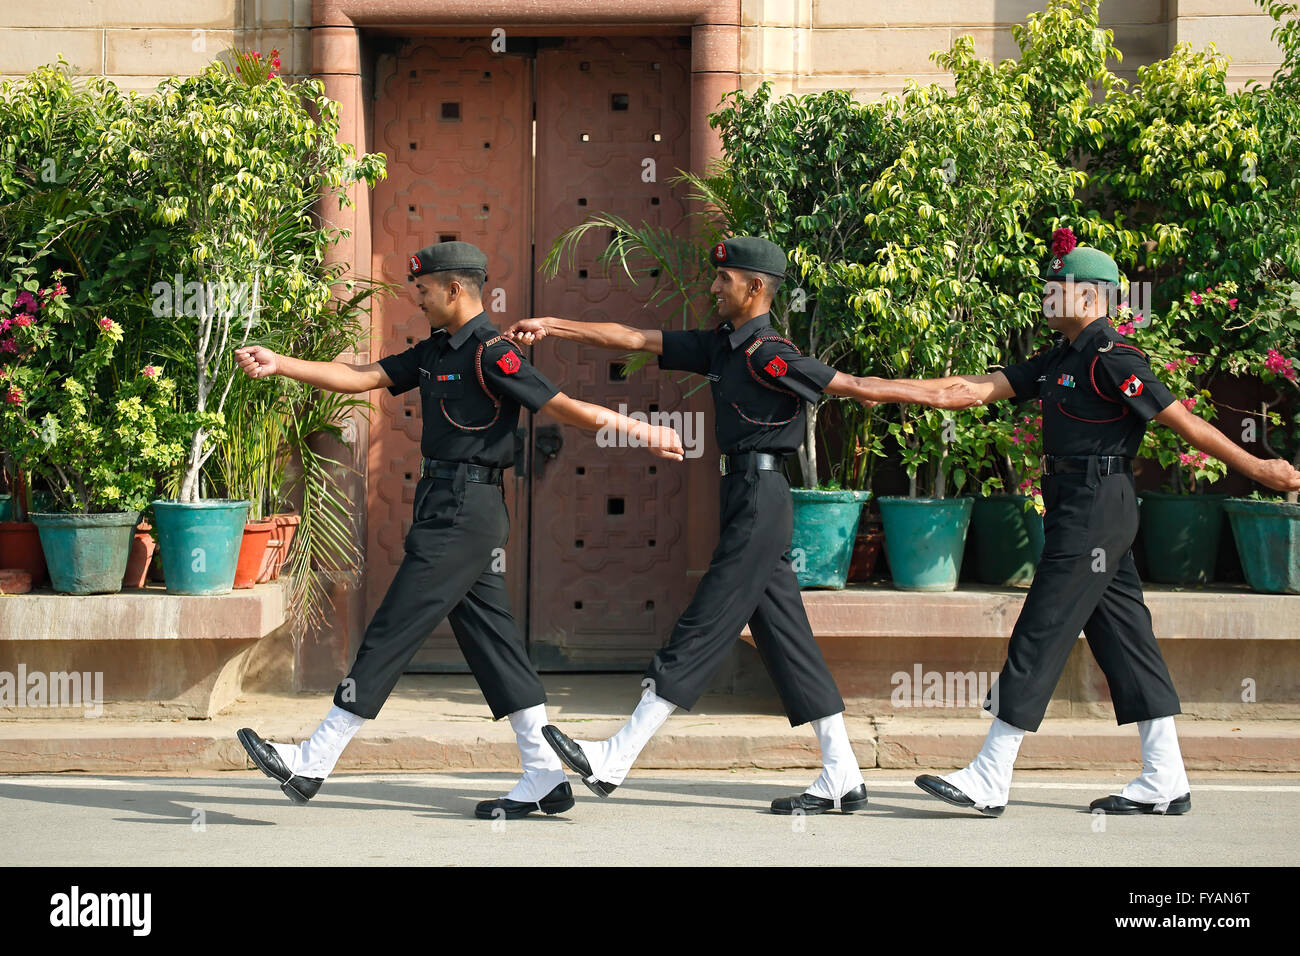 Soldiers marching during military ceremony, India Gate, New Delhi, India Stock Photo